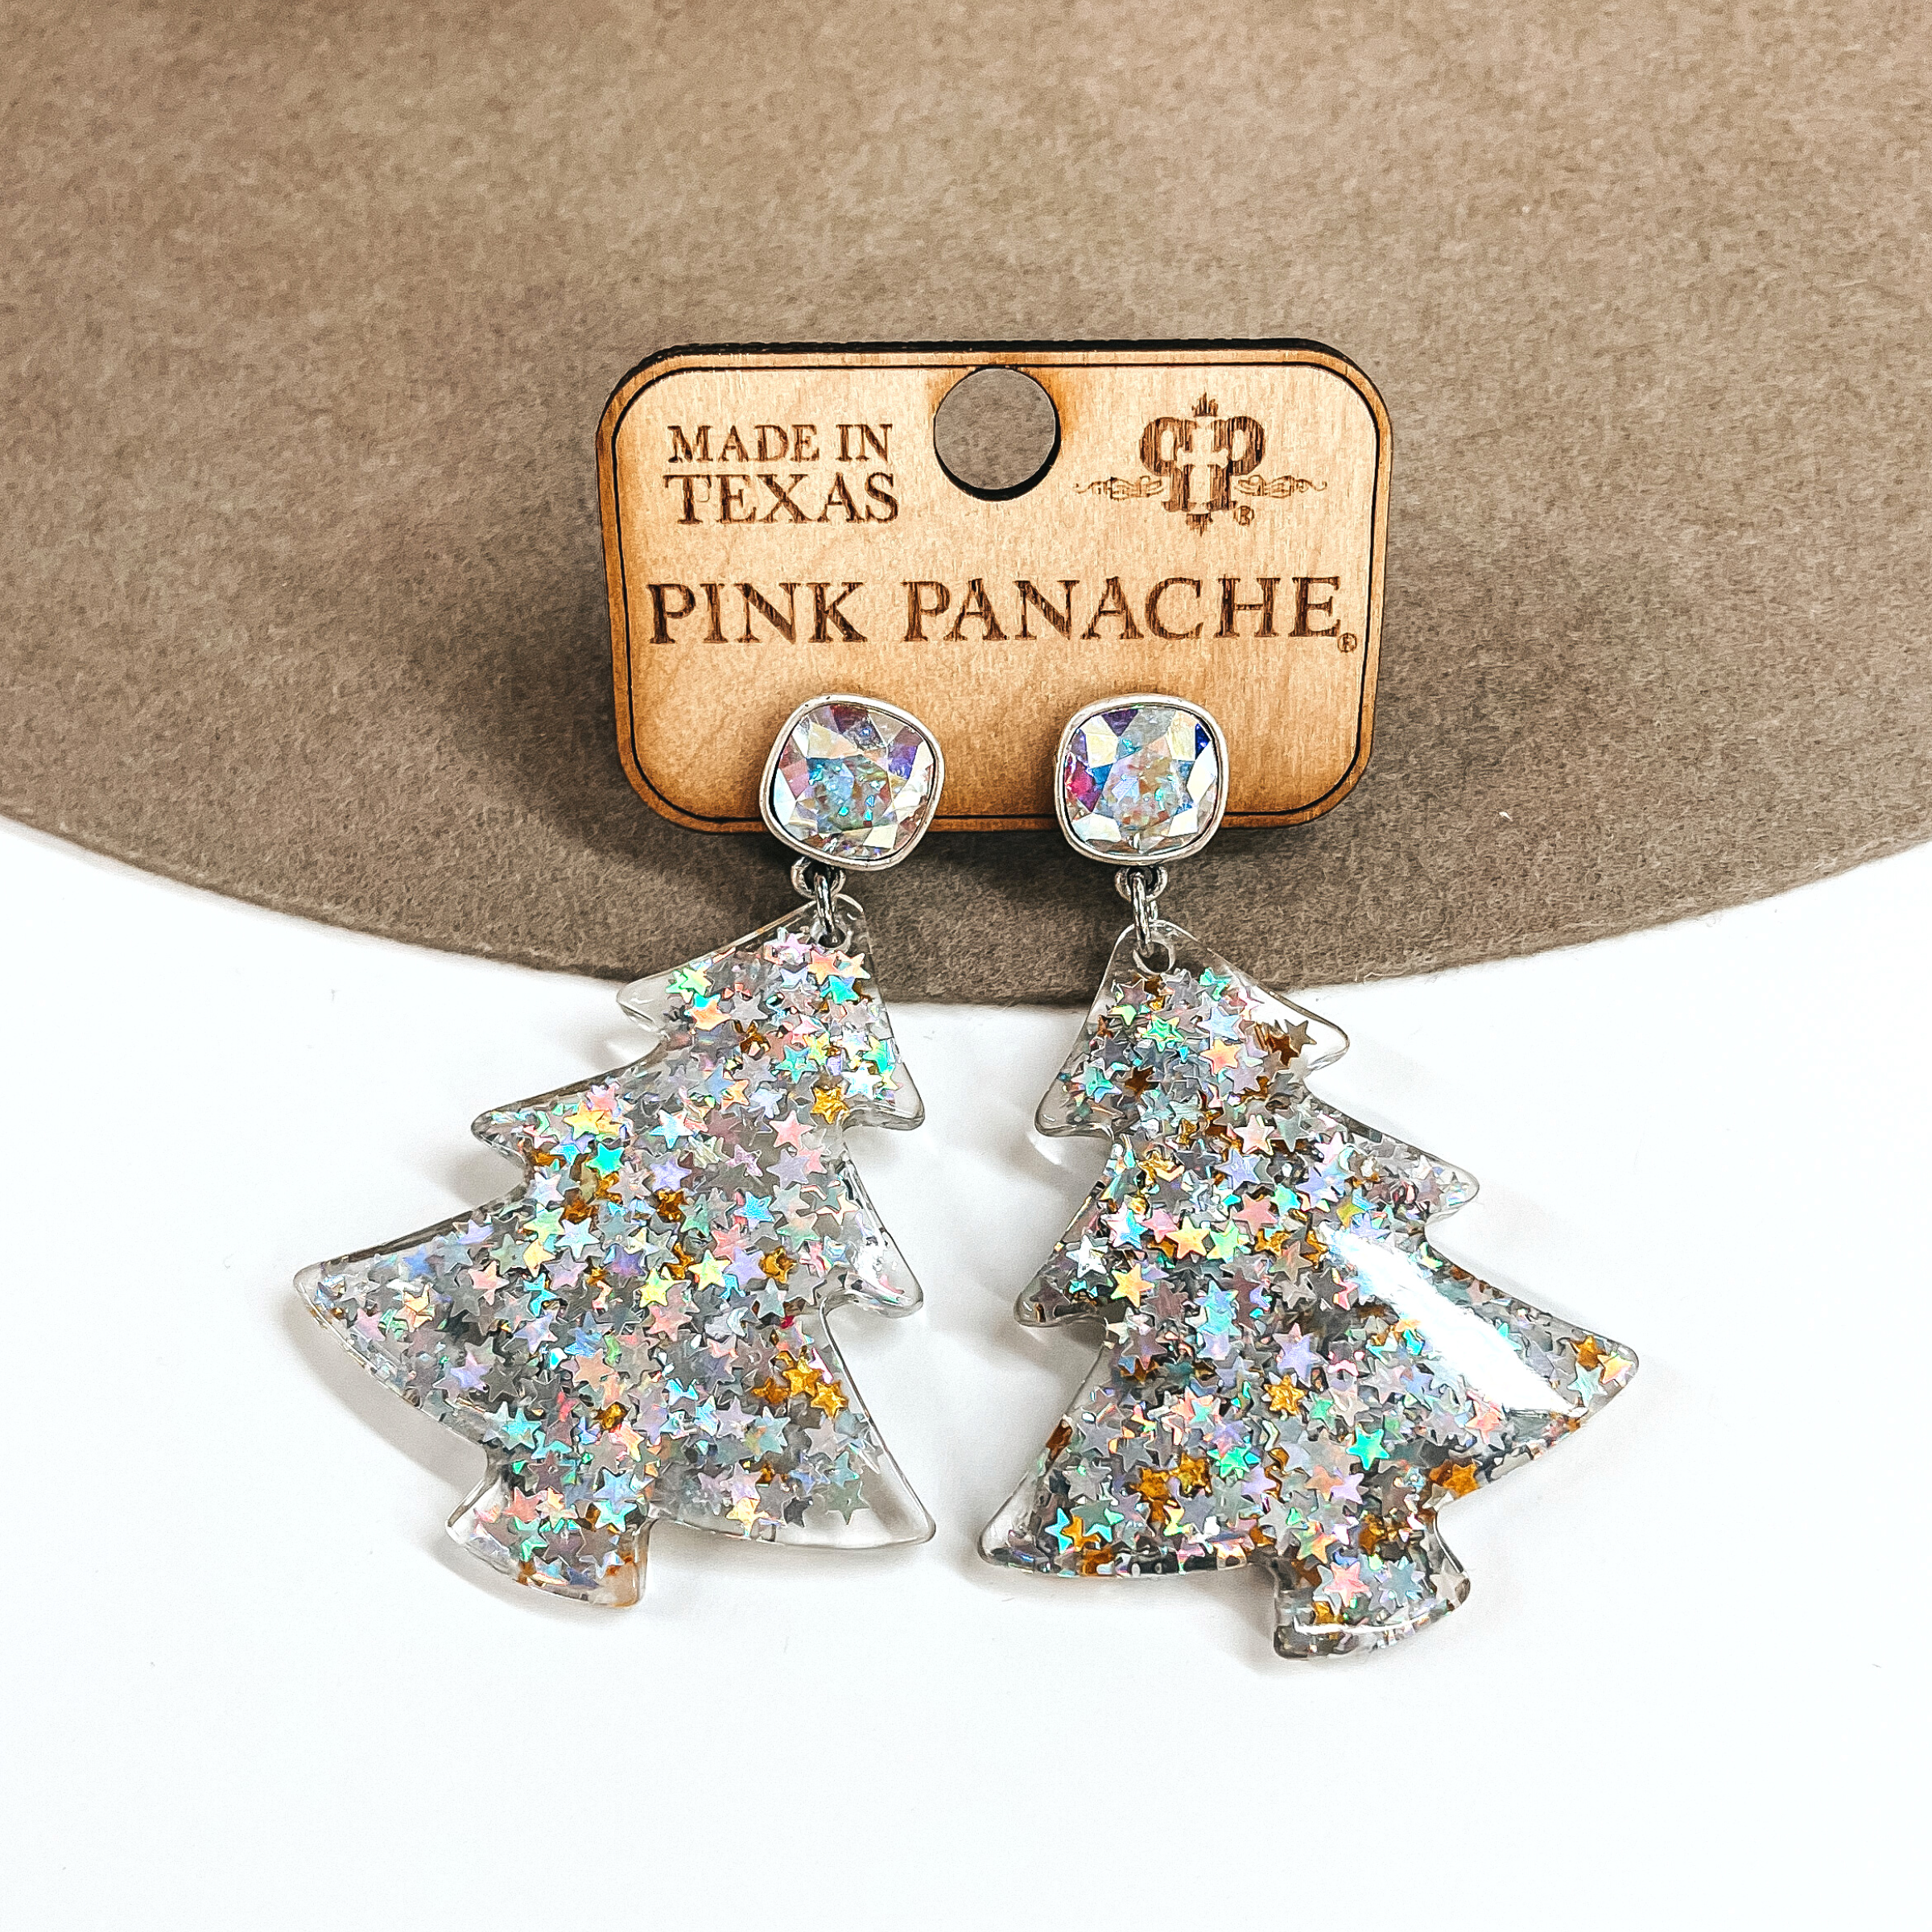 These are ab cushion cut crystal post earrings with an acrylic christmas tree drop. The christmas tree has silver and holographic glitter in small stars. These earrings are placed on a Pink Panache earrings holder. These earrings are taken on a brown felt hat brim and on a white background.